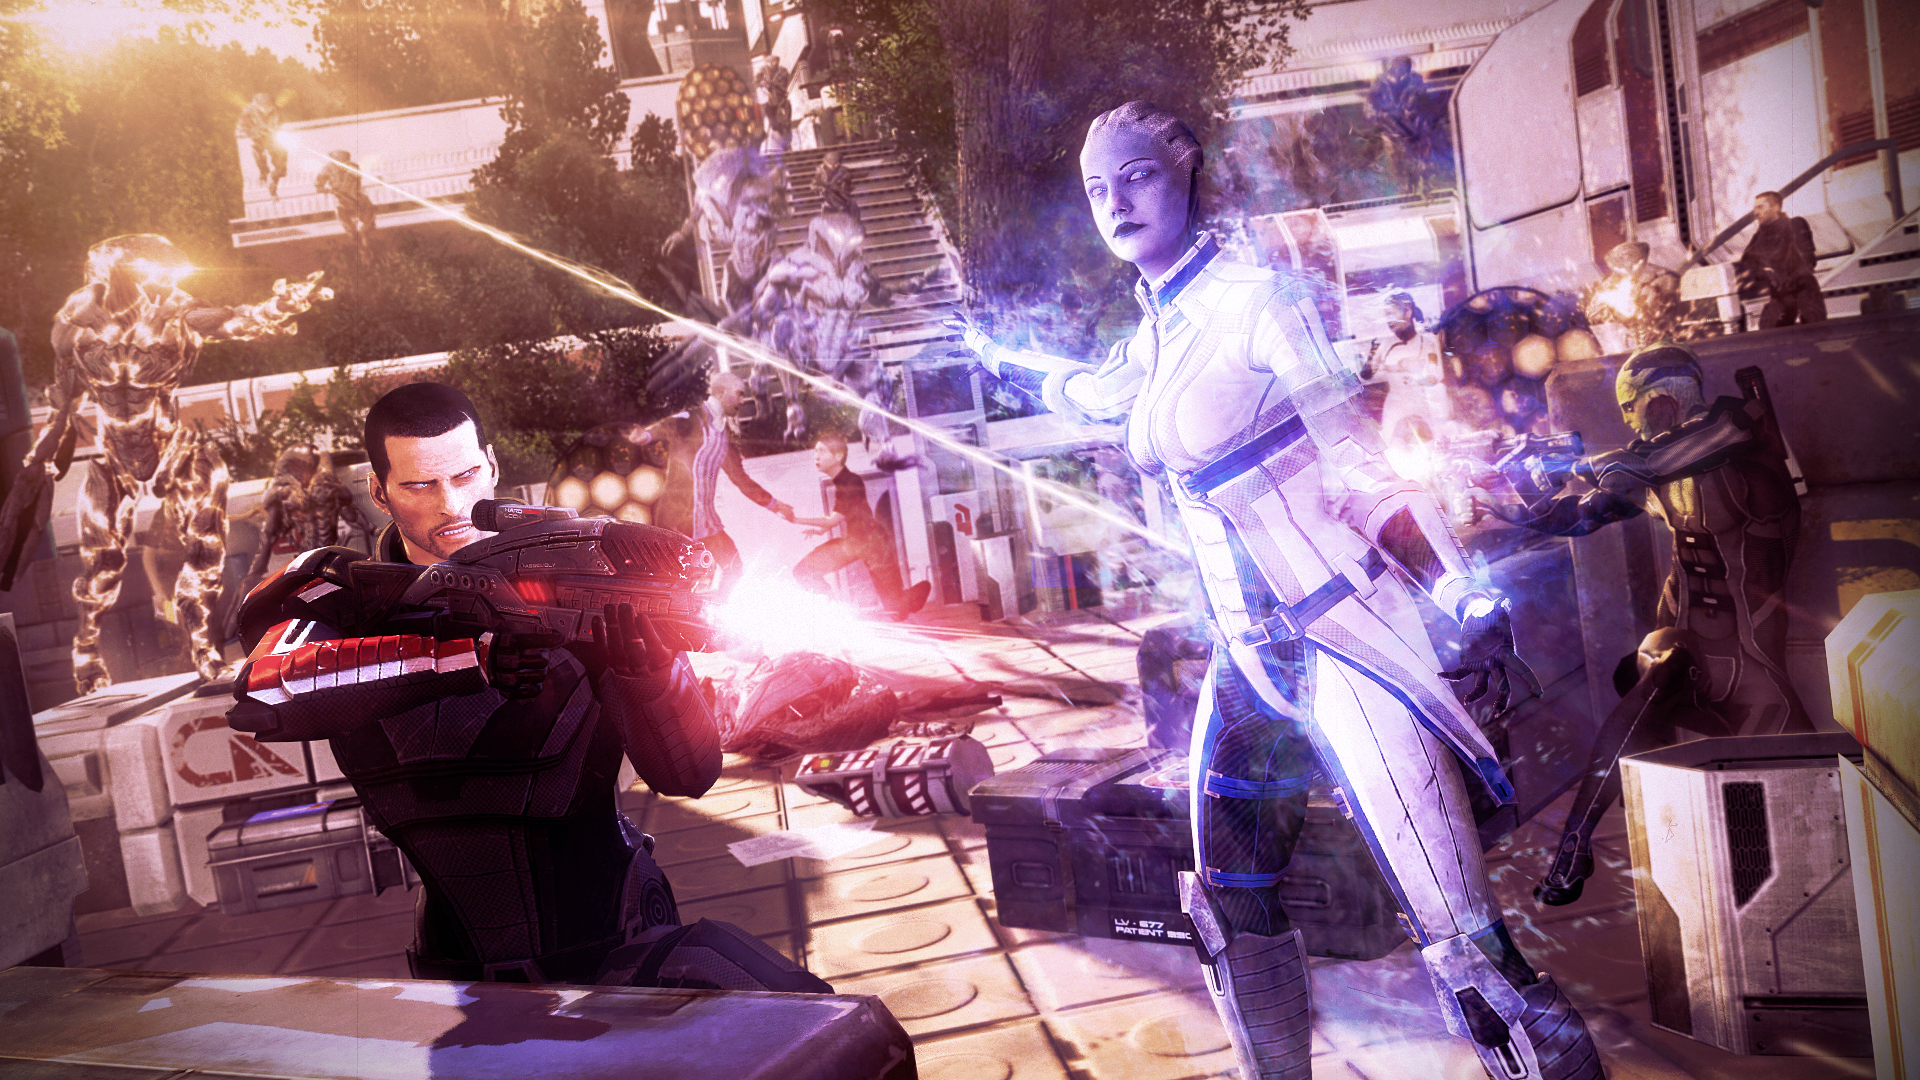 protecting_the_colony___mass_effect_by_urbanator-d3hsdwe.png